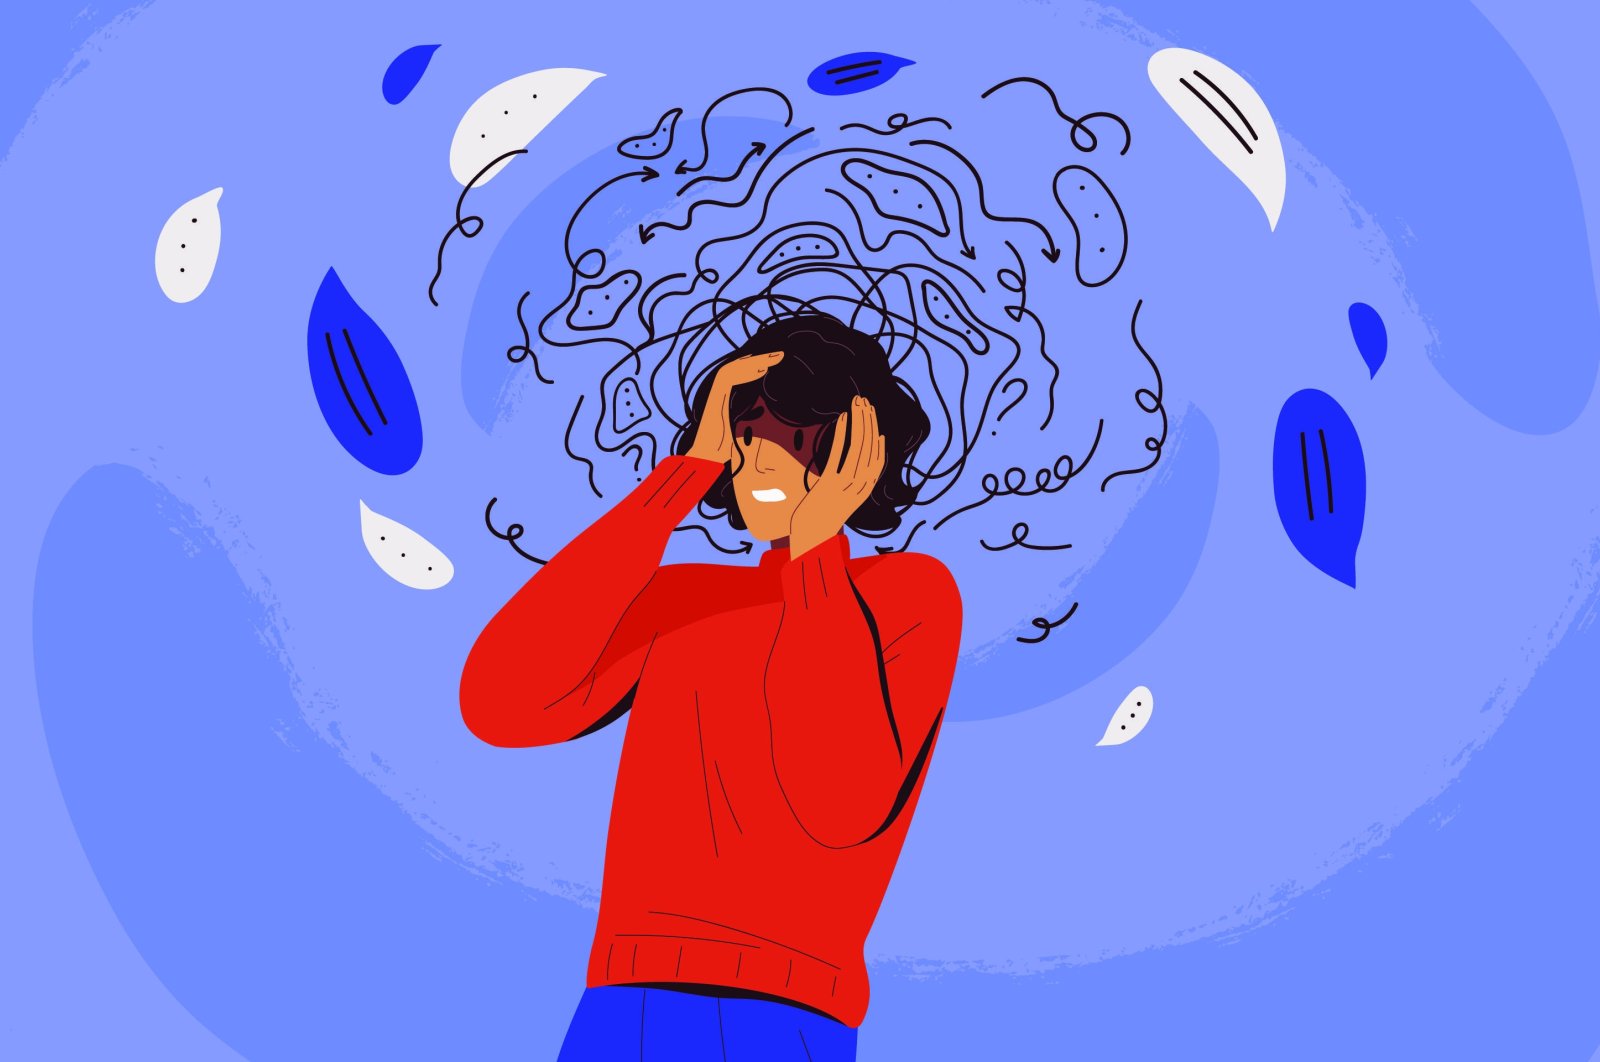 An illustration of a person suffering from overthinking. (Shutterstock Photo)